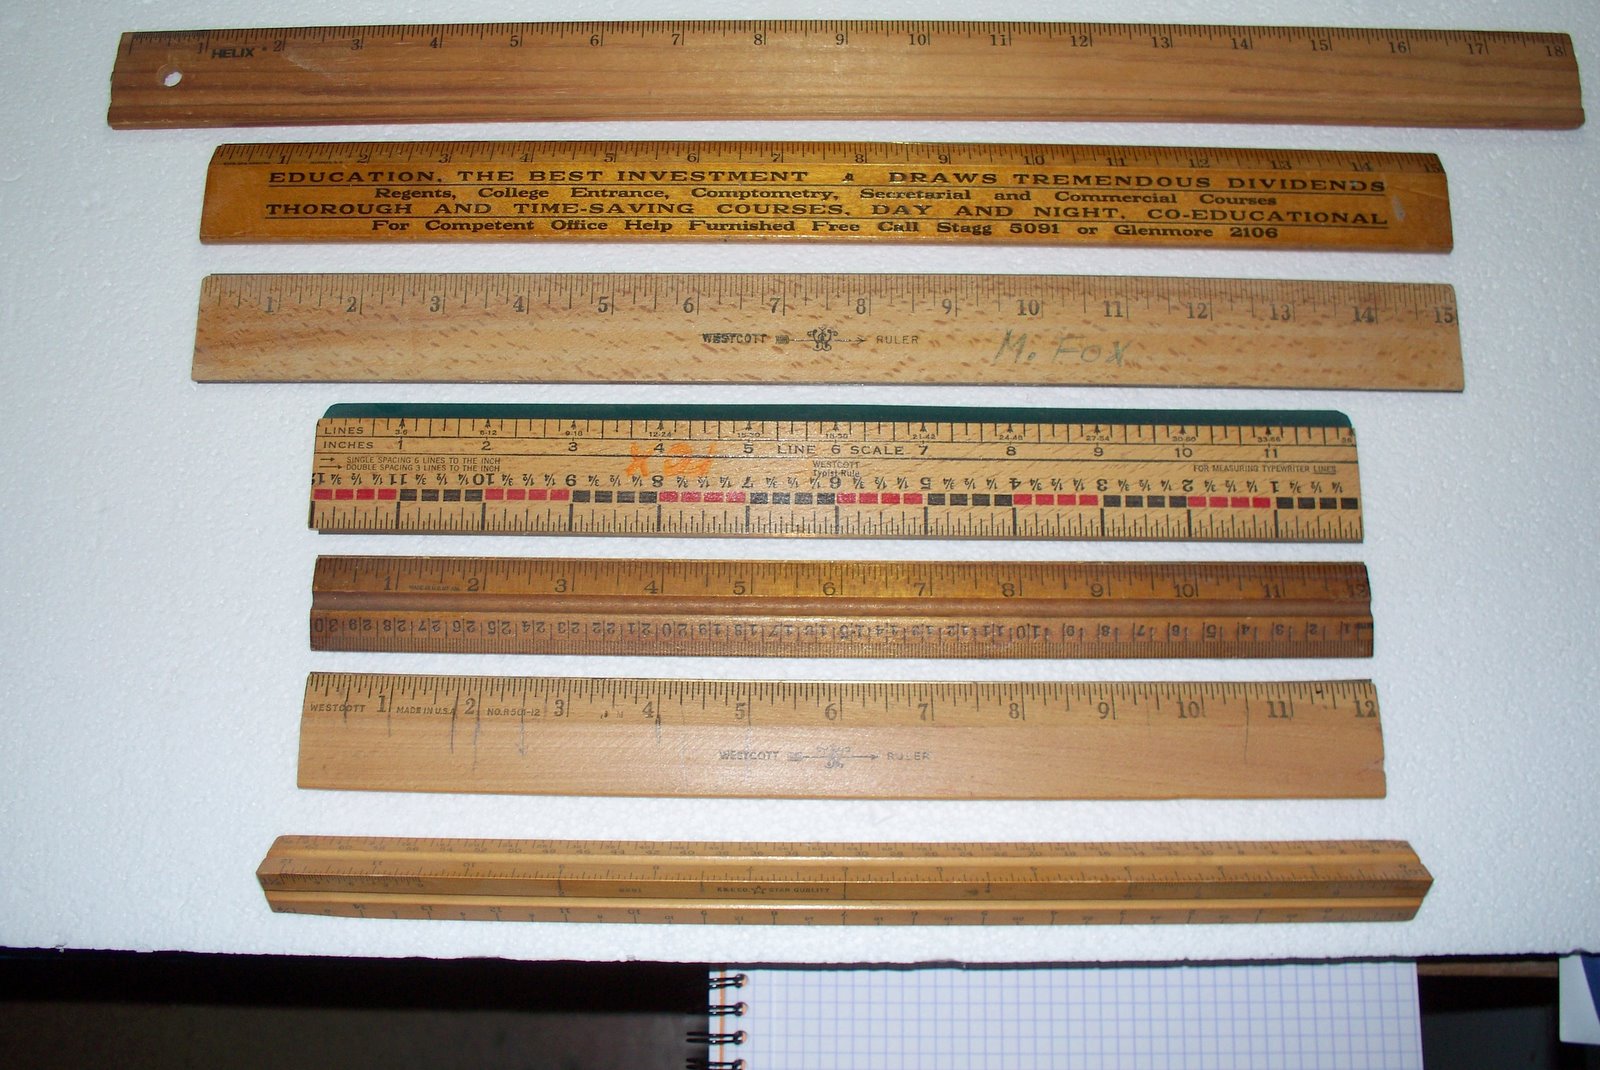 Lot of 2 Vintage Westcott Rulers, 12'', Wooden Rulers Condition_Used